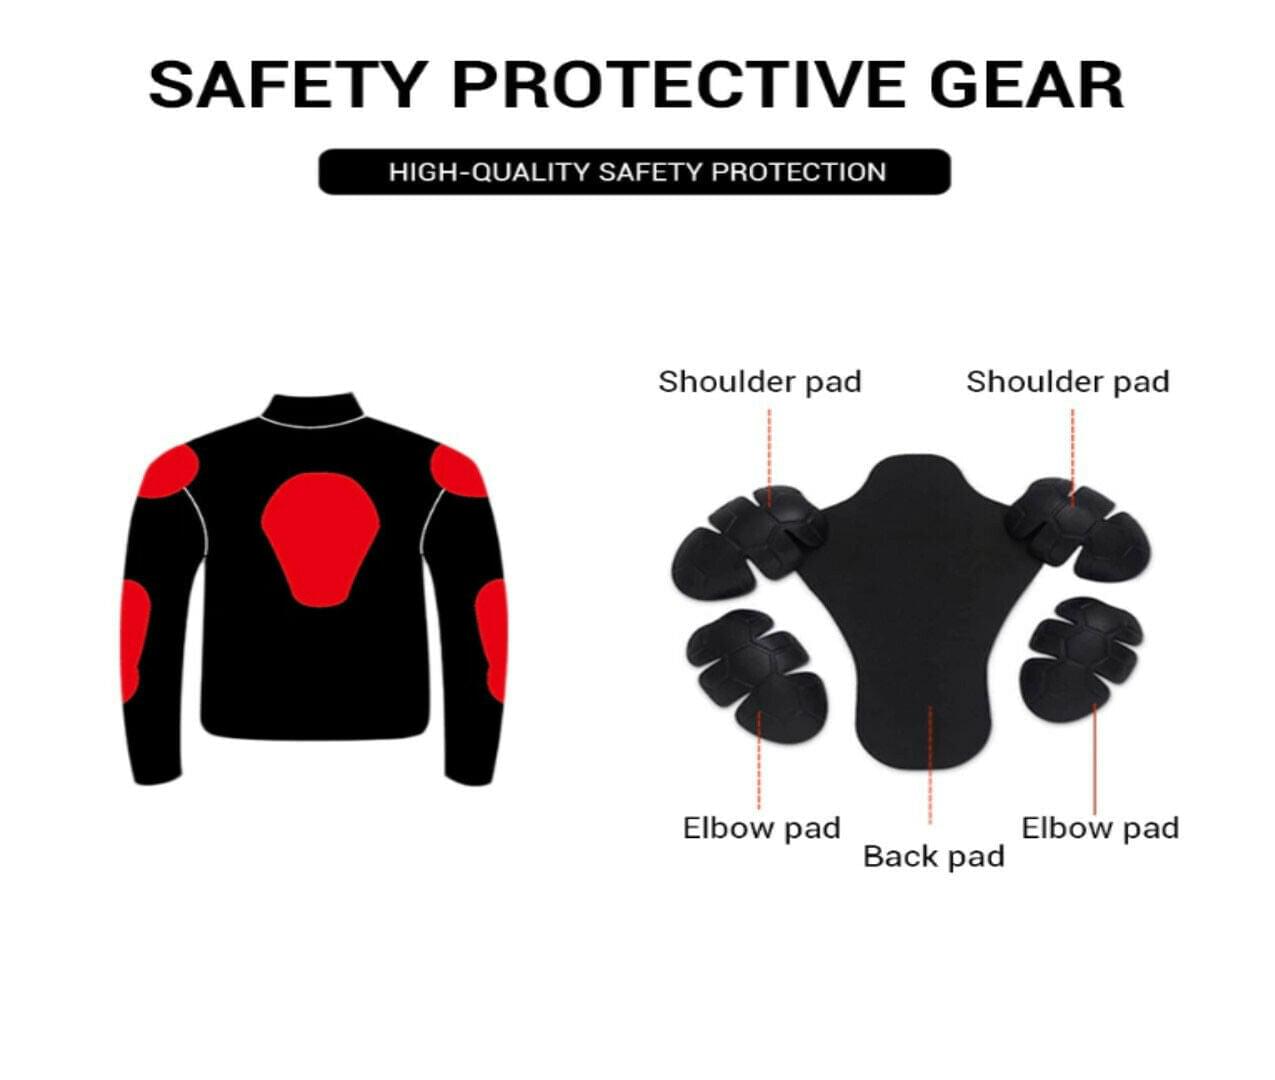 Custom Designed Protective Jacket with CE Certified Protections by Milo Racing - Perforated - Unisex